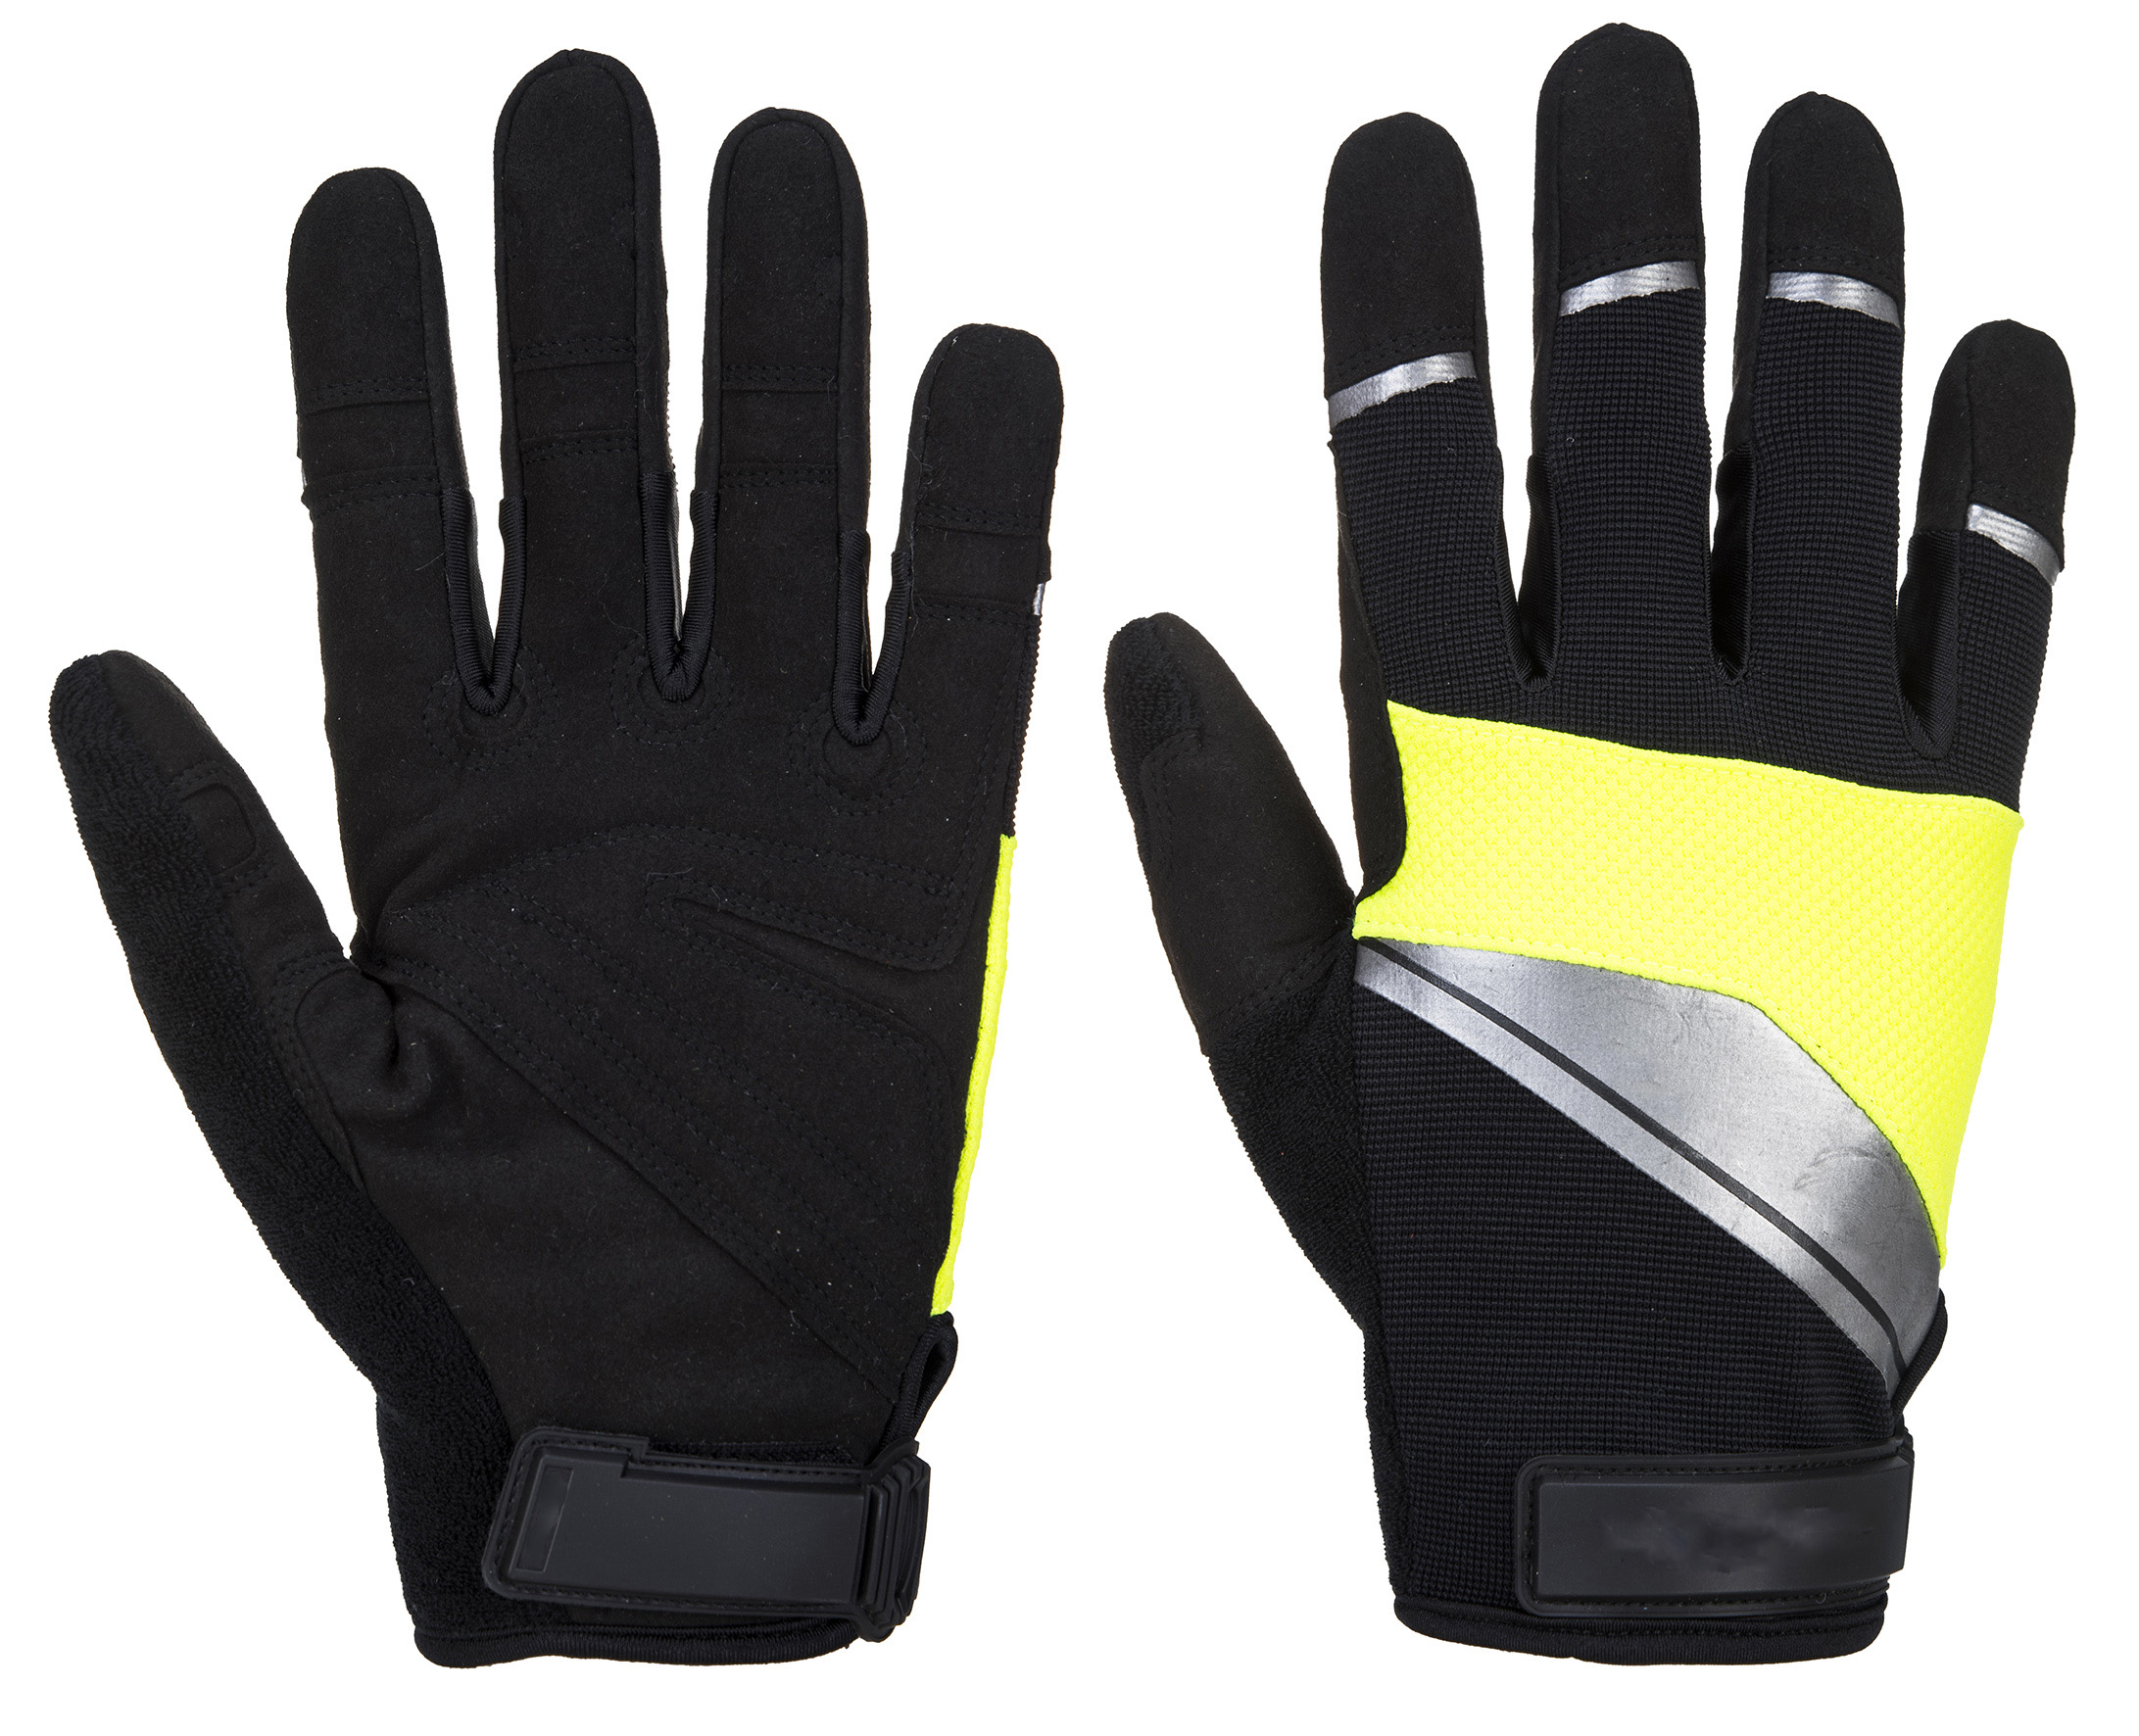 Flexible durable breathable house safety work gloves